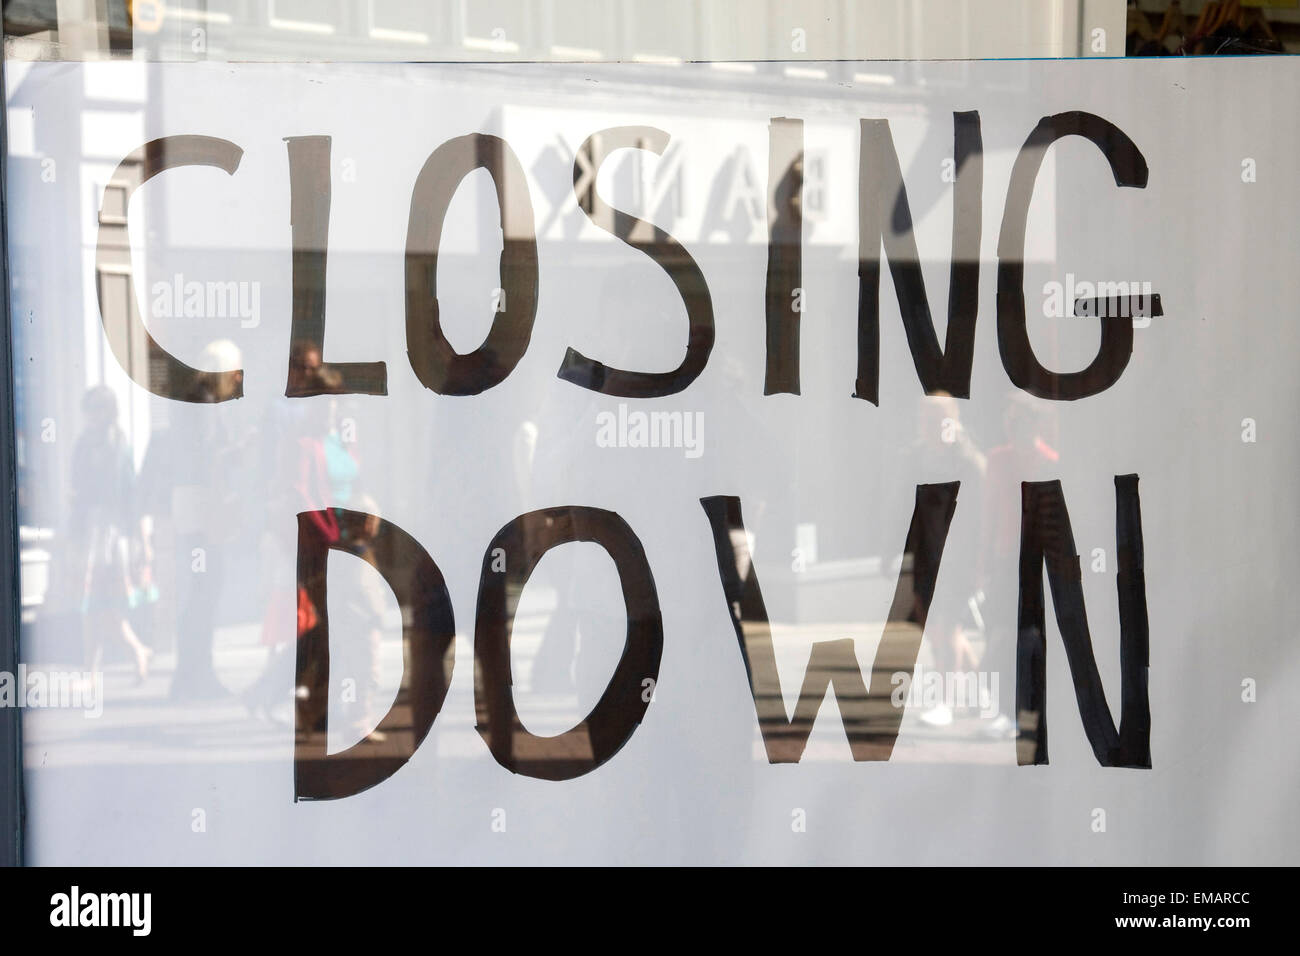 A 'closing down' sign on a High street shop. Shoppers' reflections can be seen along with the recently closed clothing shop BANK. April 18th, 2015. Stock Photo